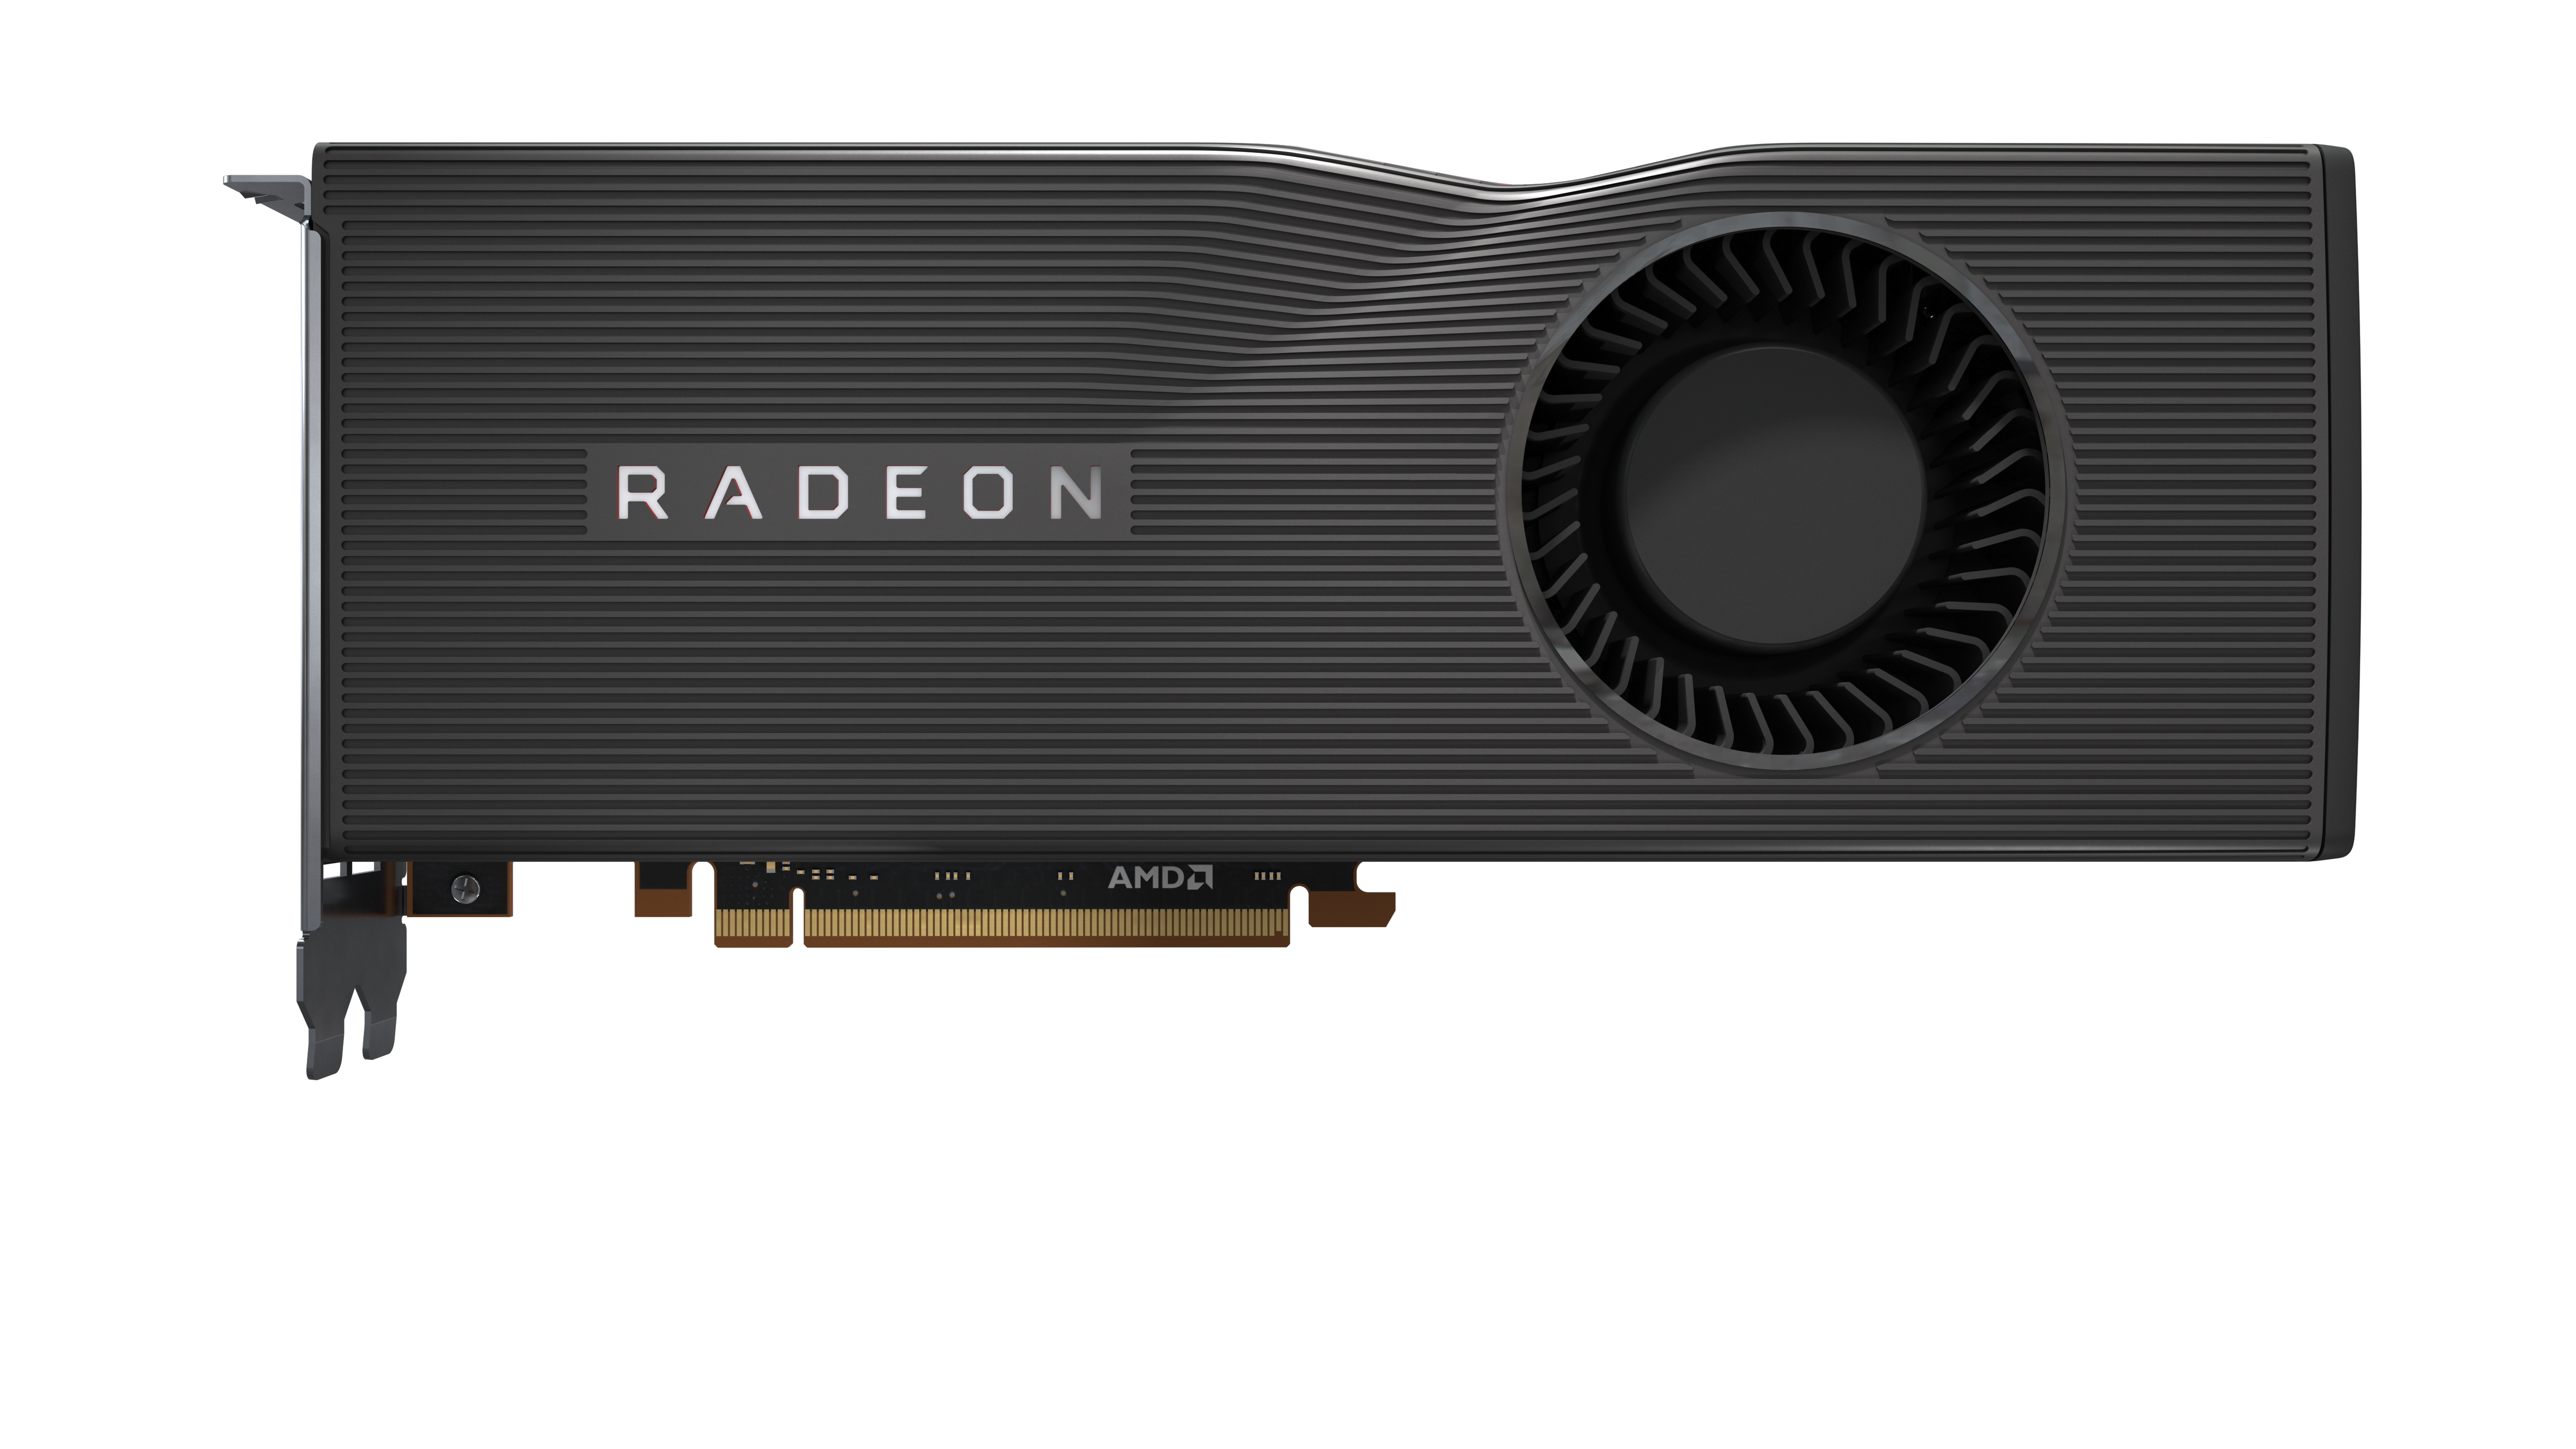 Available Now, AMD's Xbox Game Pass for PC Gives Radeon + Ryzen Fans Access  to Play Gears 5, along with 100+ PC Games